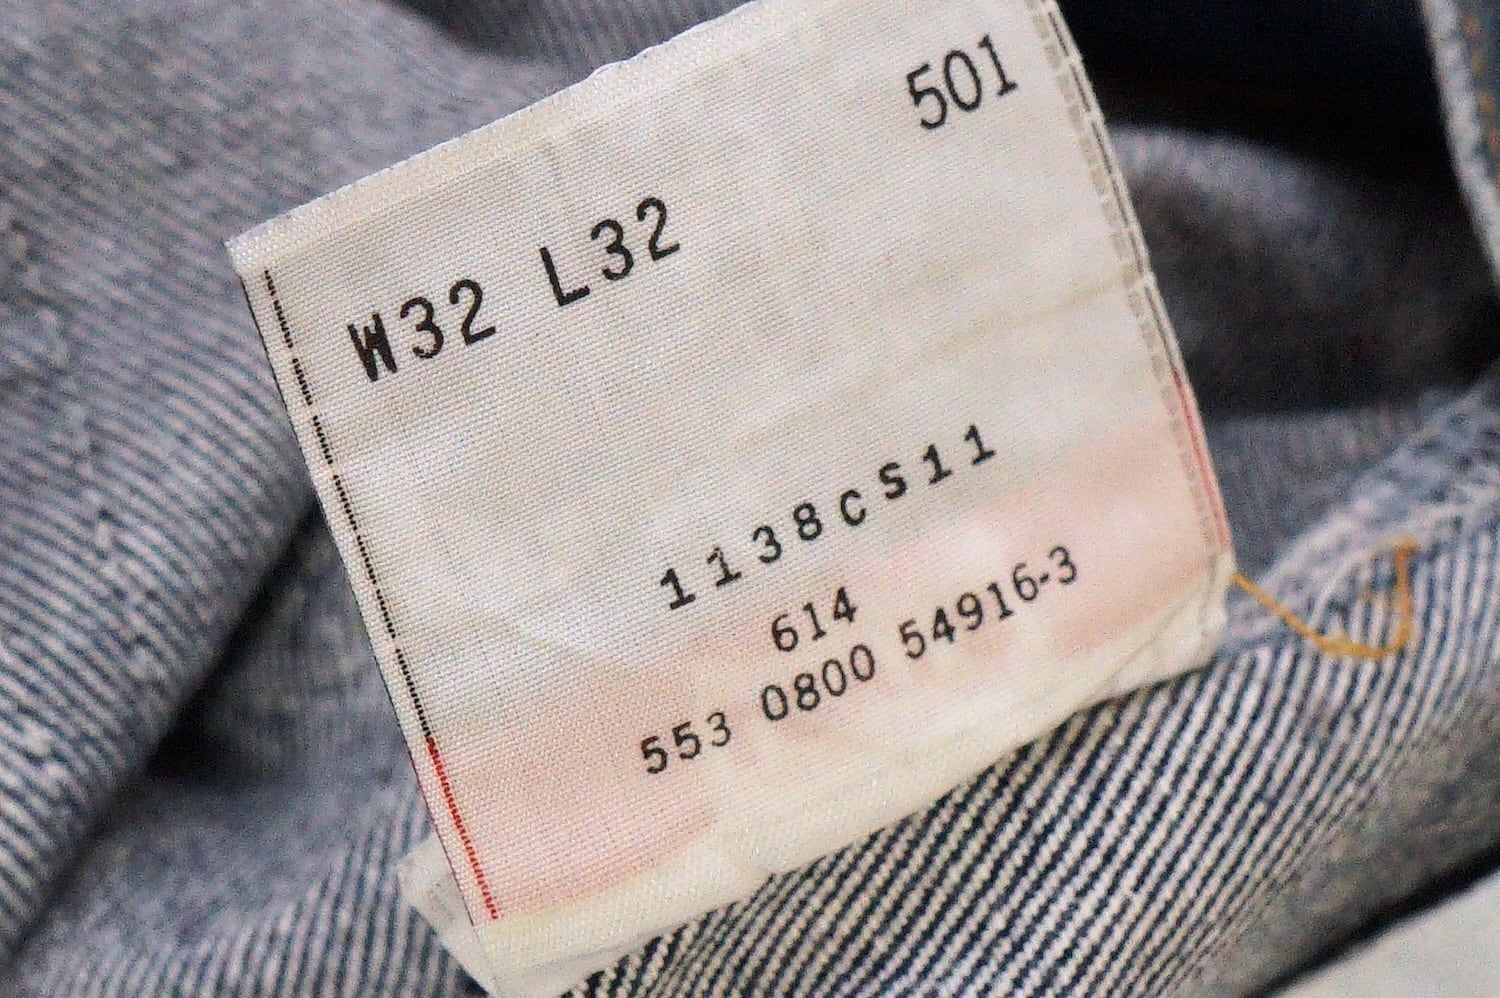 1932 Levi's リーバイス 501 W32 L32 2000年 米国製 MADE IN USA ...